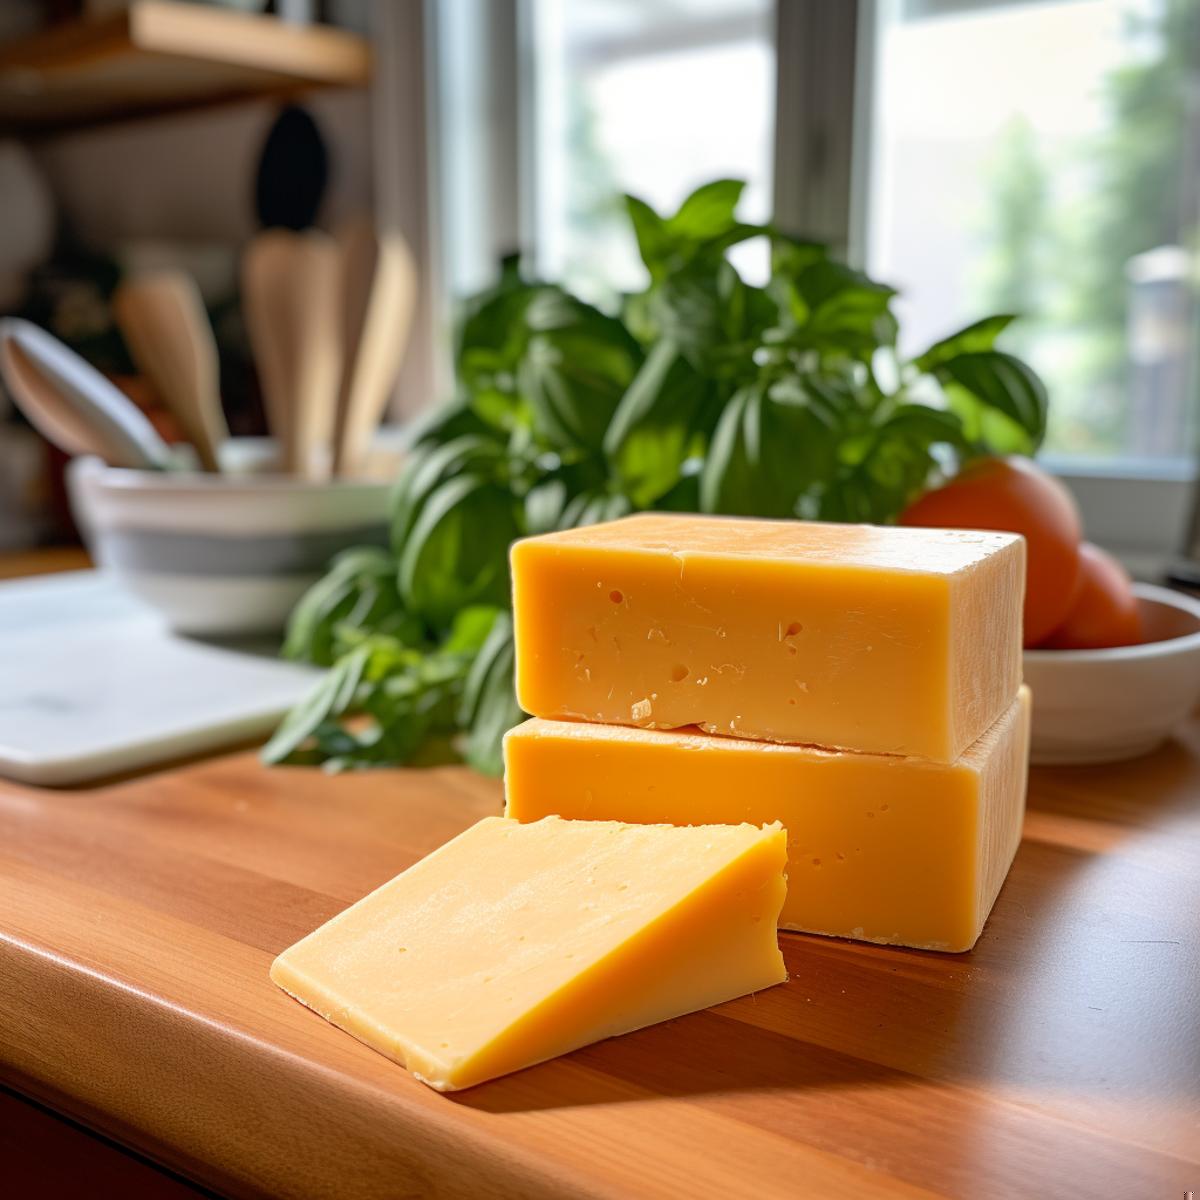 Cheddar Cheese on a kitchen counter